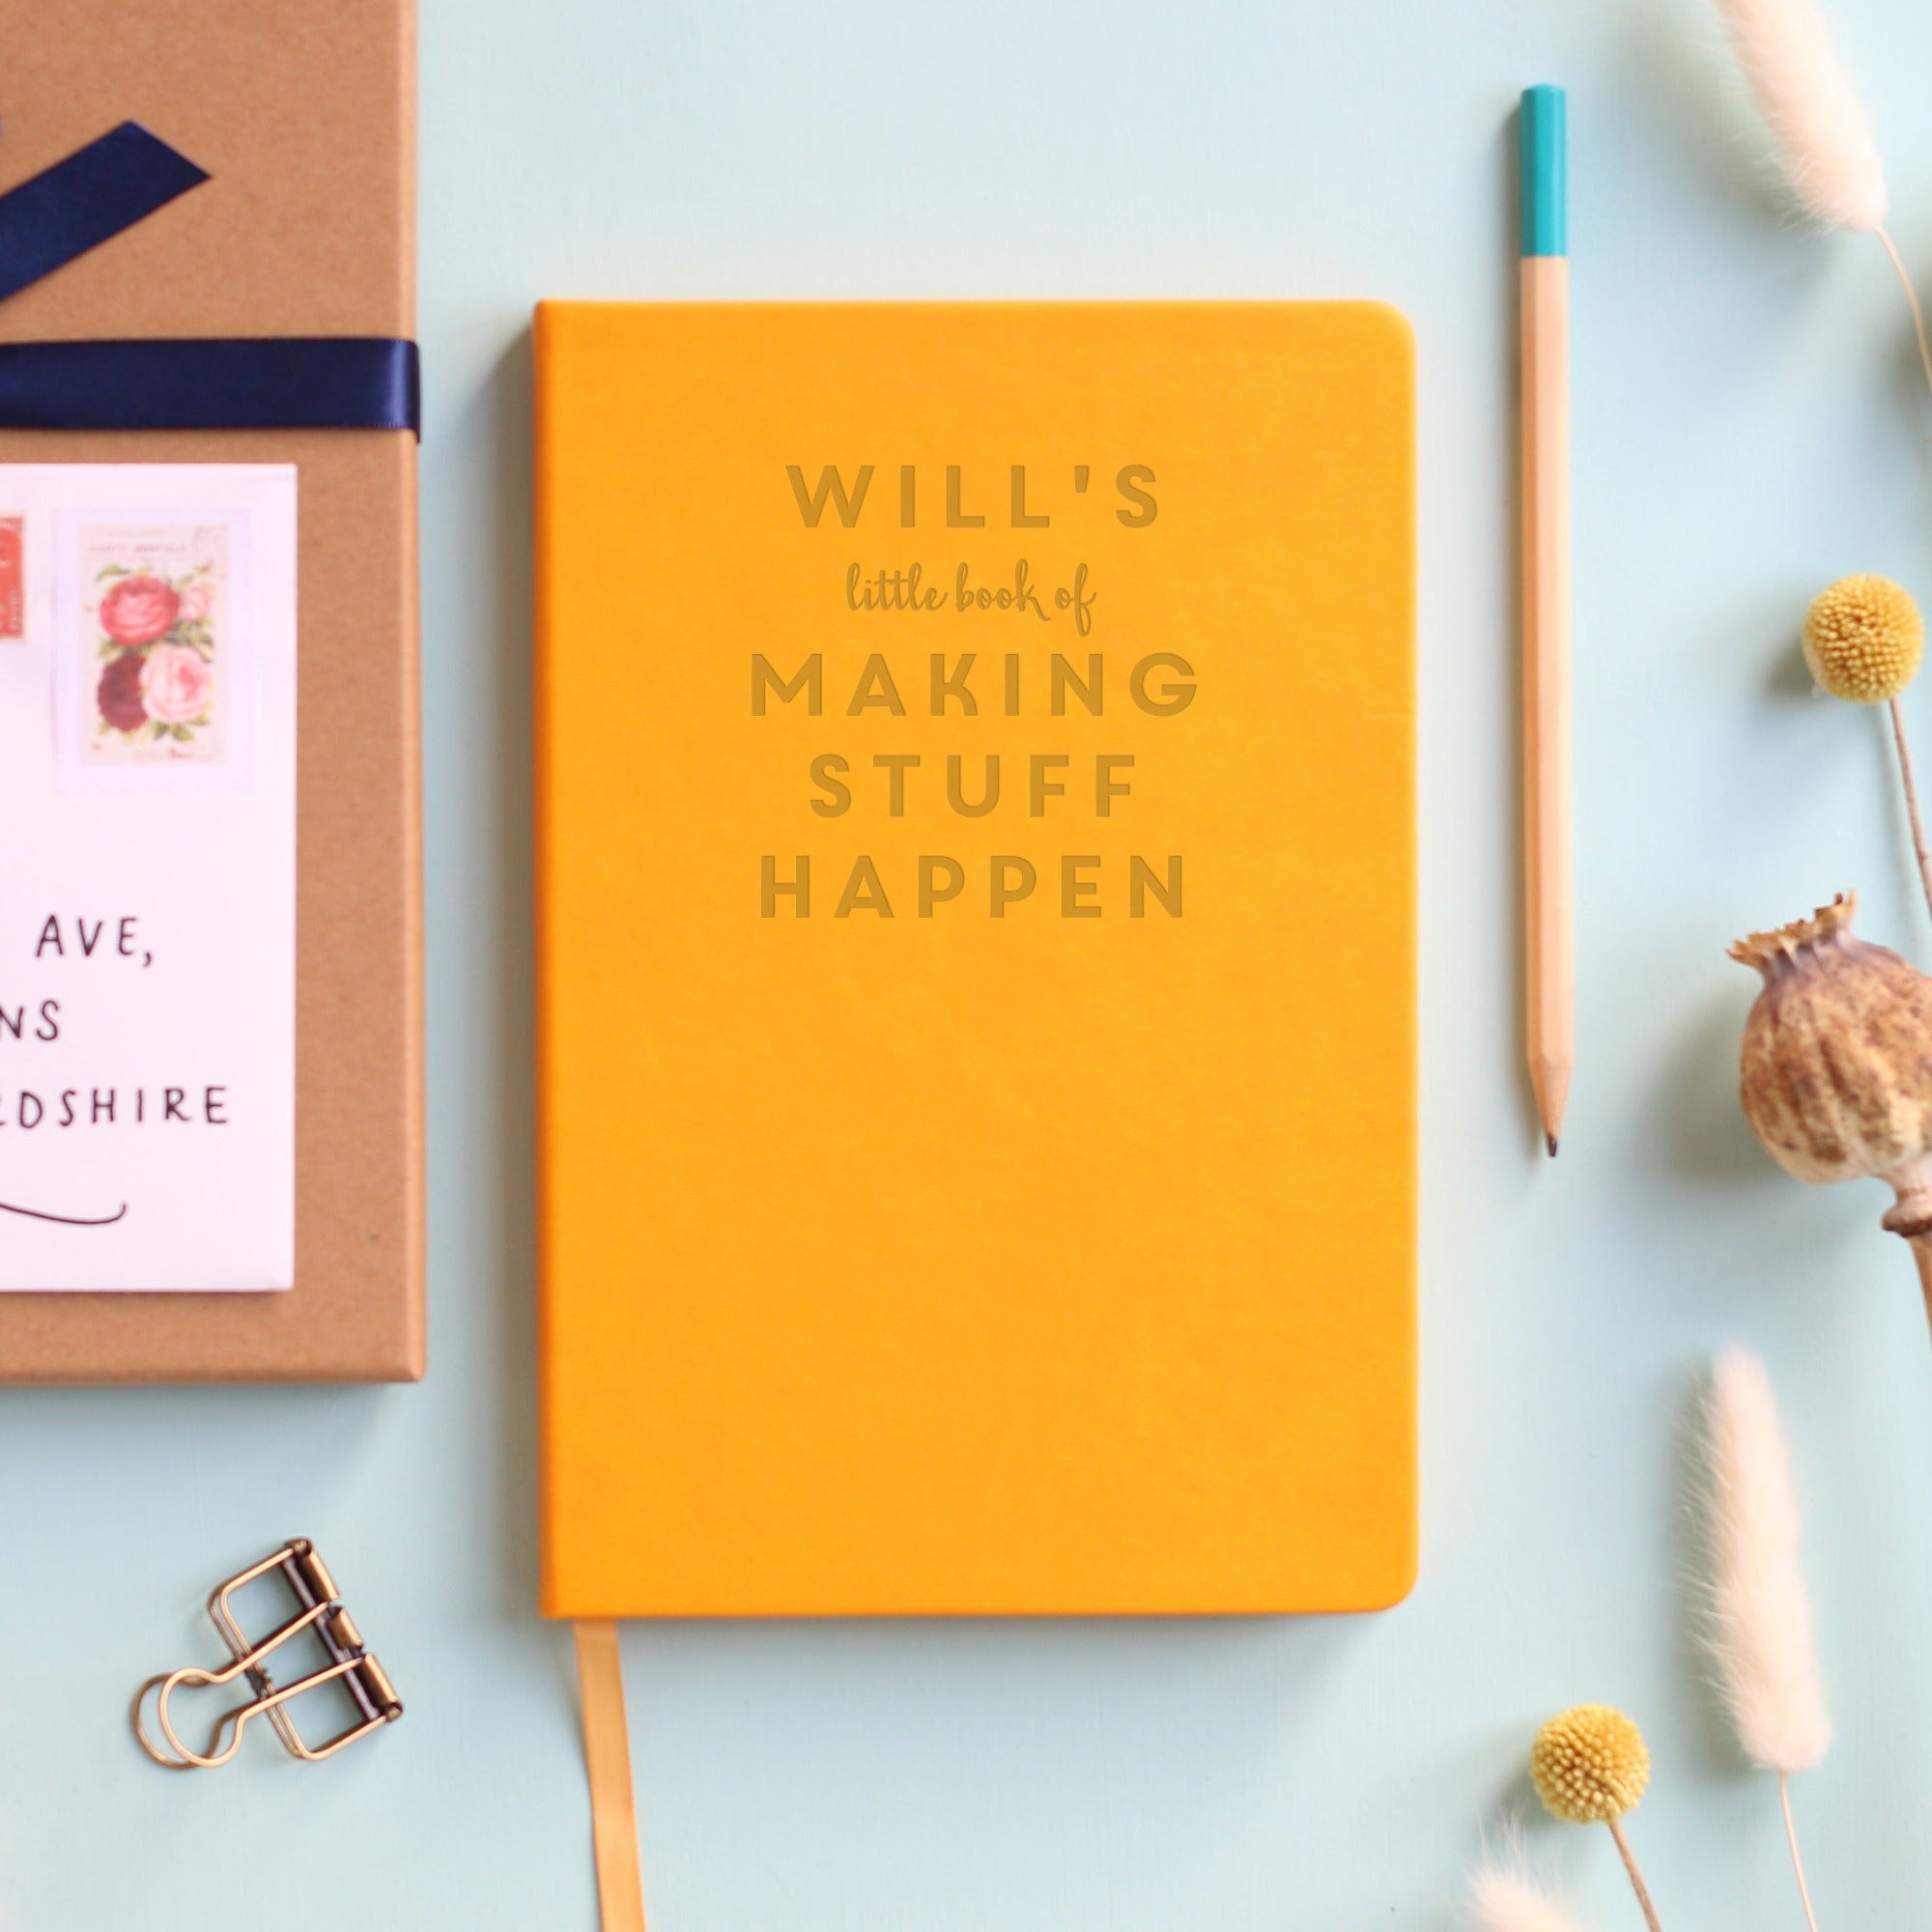 Stocking fillers for stationery lovers